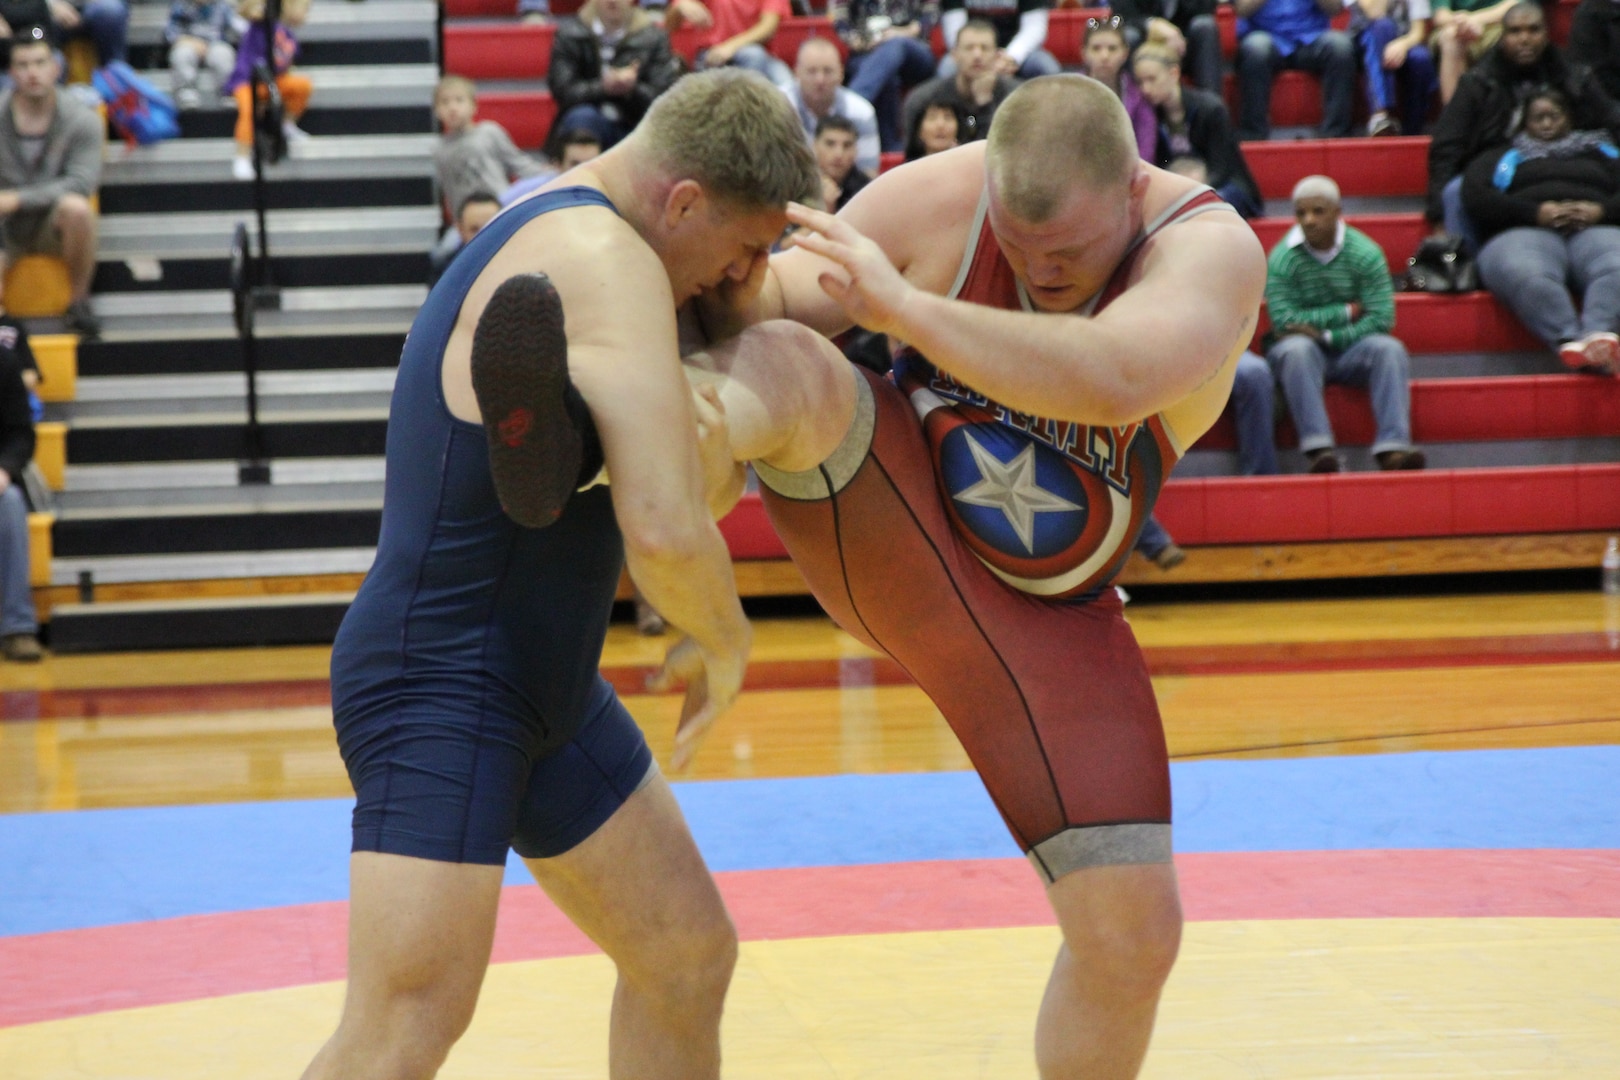 Army PFC Eric Nye battles Marine 1stLt Scott Steele in the Freestyle 125kg competition.  Steele led the match 4-0 early on, but Nye tied the score on one throw and turned the tide winning by pinfall with 16 seconds left in the match.  